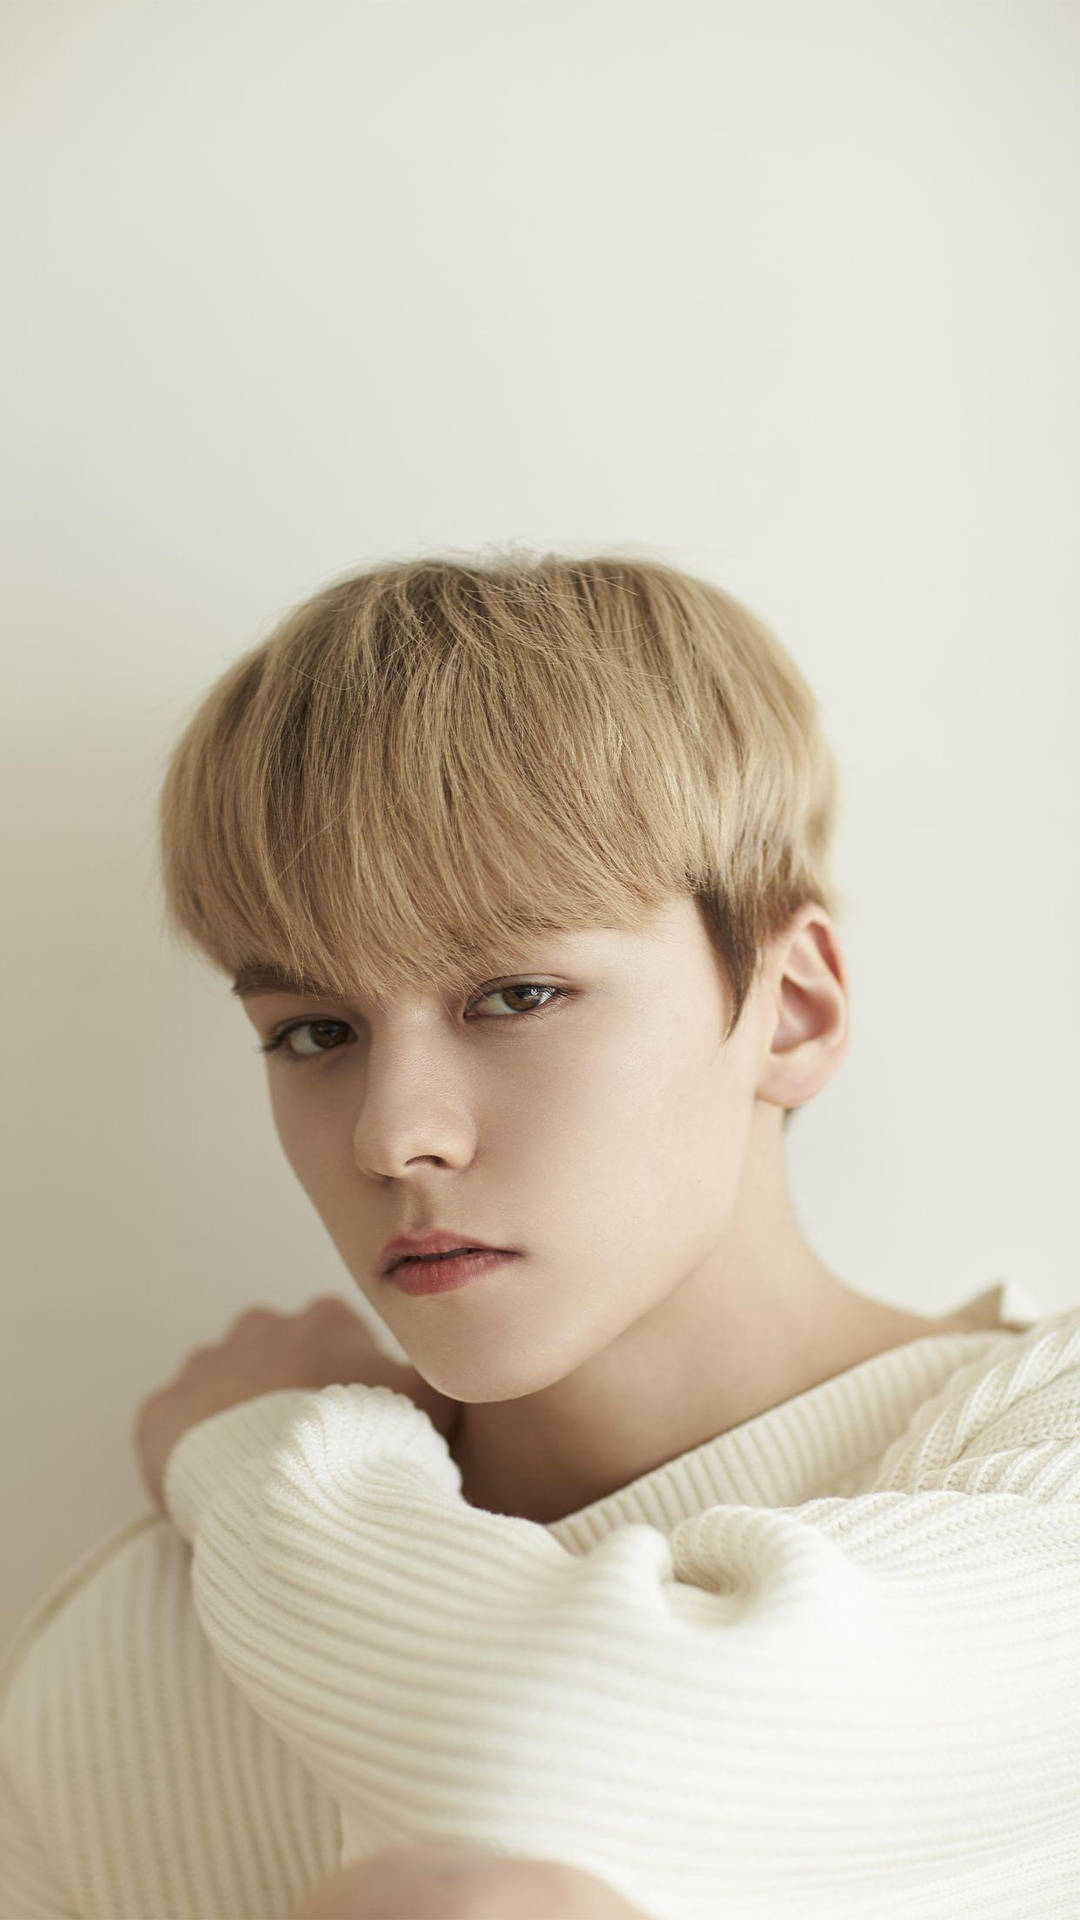 Vernon With Faded Blonde Hair Wallpaper